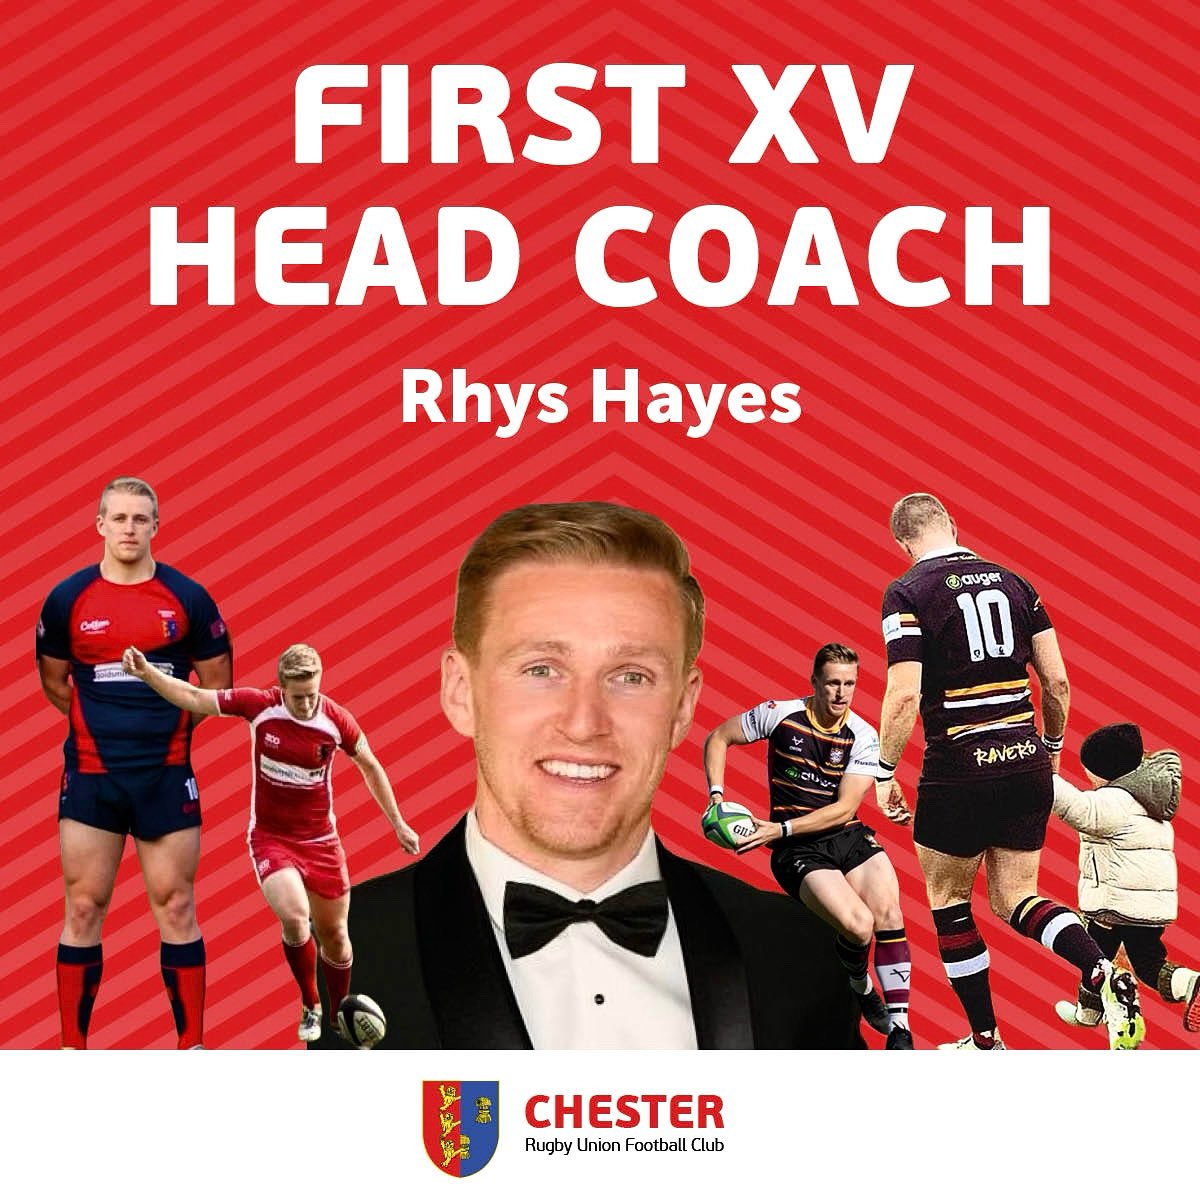 We’re delighted to announce that Rhys Hayes is returning home to Chester Rugby Club as the First XV Head Coach for the 2024/25 season. We look forward to welcoming Rhys back for pre-season this summer. #upthechess Photo Credit: KF Photography/ Steve Flynn Photography